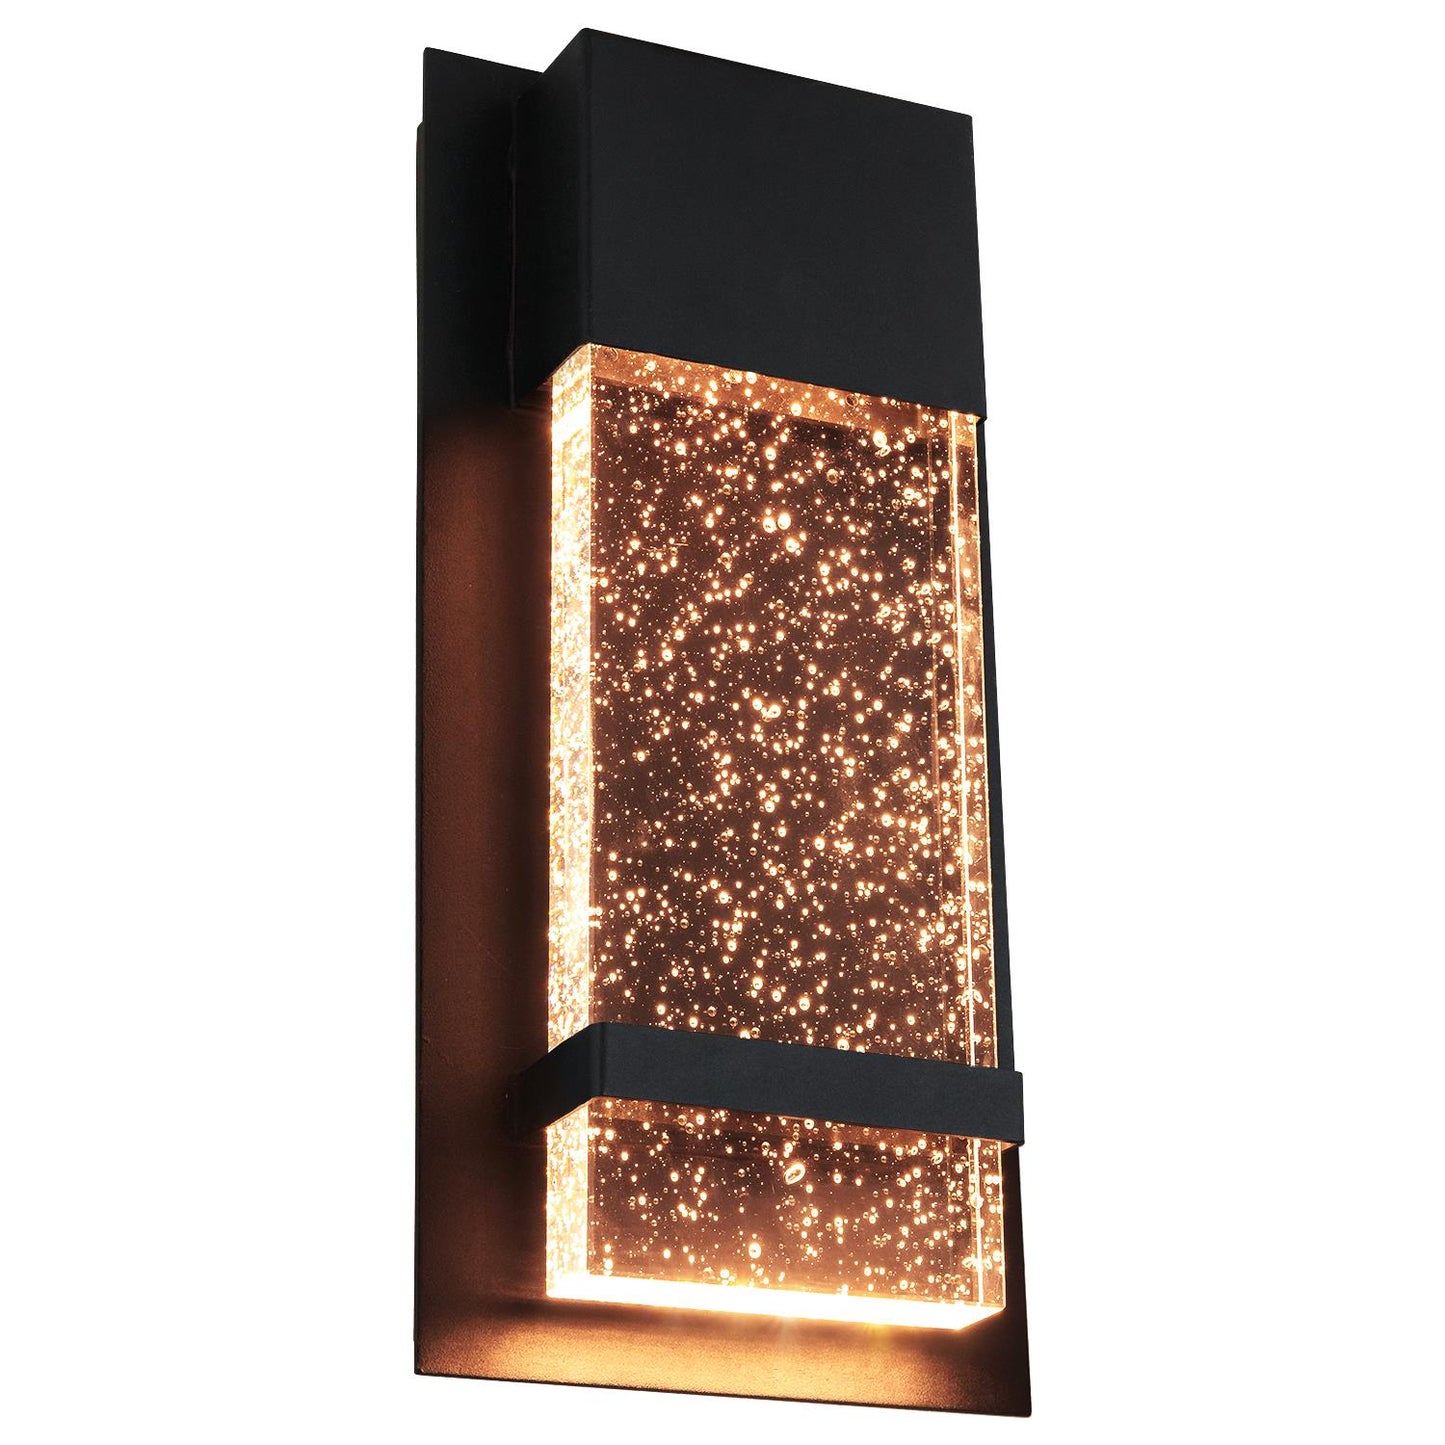 Sunlite LED Wall Sconce, Black Metal Frame with Raindrop Effect Glass Panel,  6.5" Wide, 5000K Super White, Indoor & Outdoor, ADA Compliant